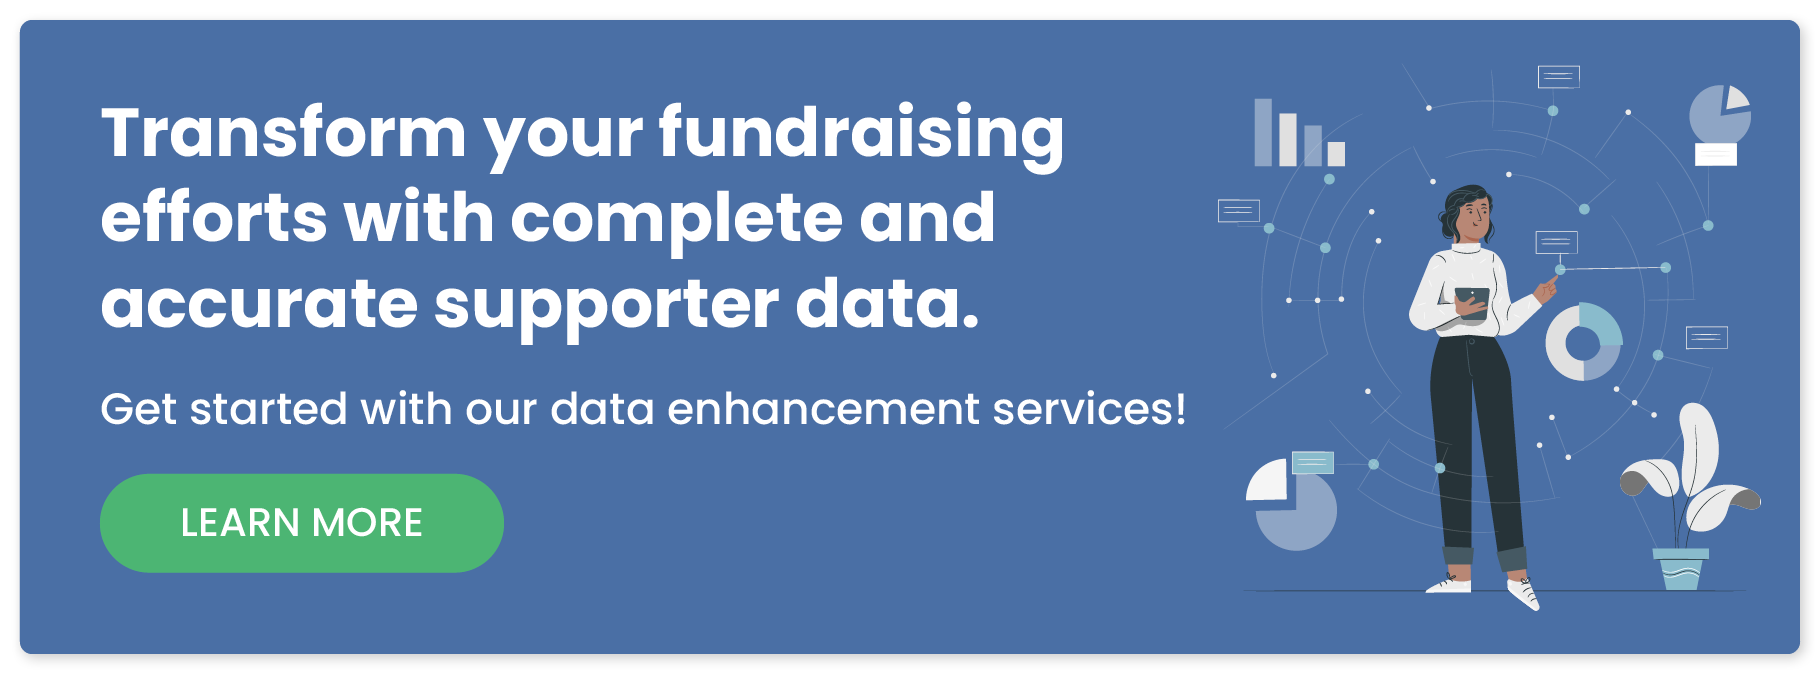 Transform your fundraising efforts with complete and accurate supporter data. Get started with our data enhancement services!